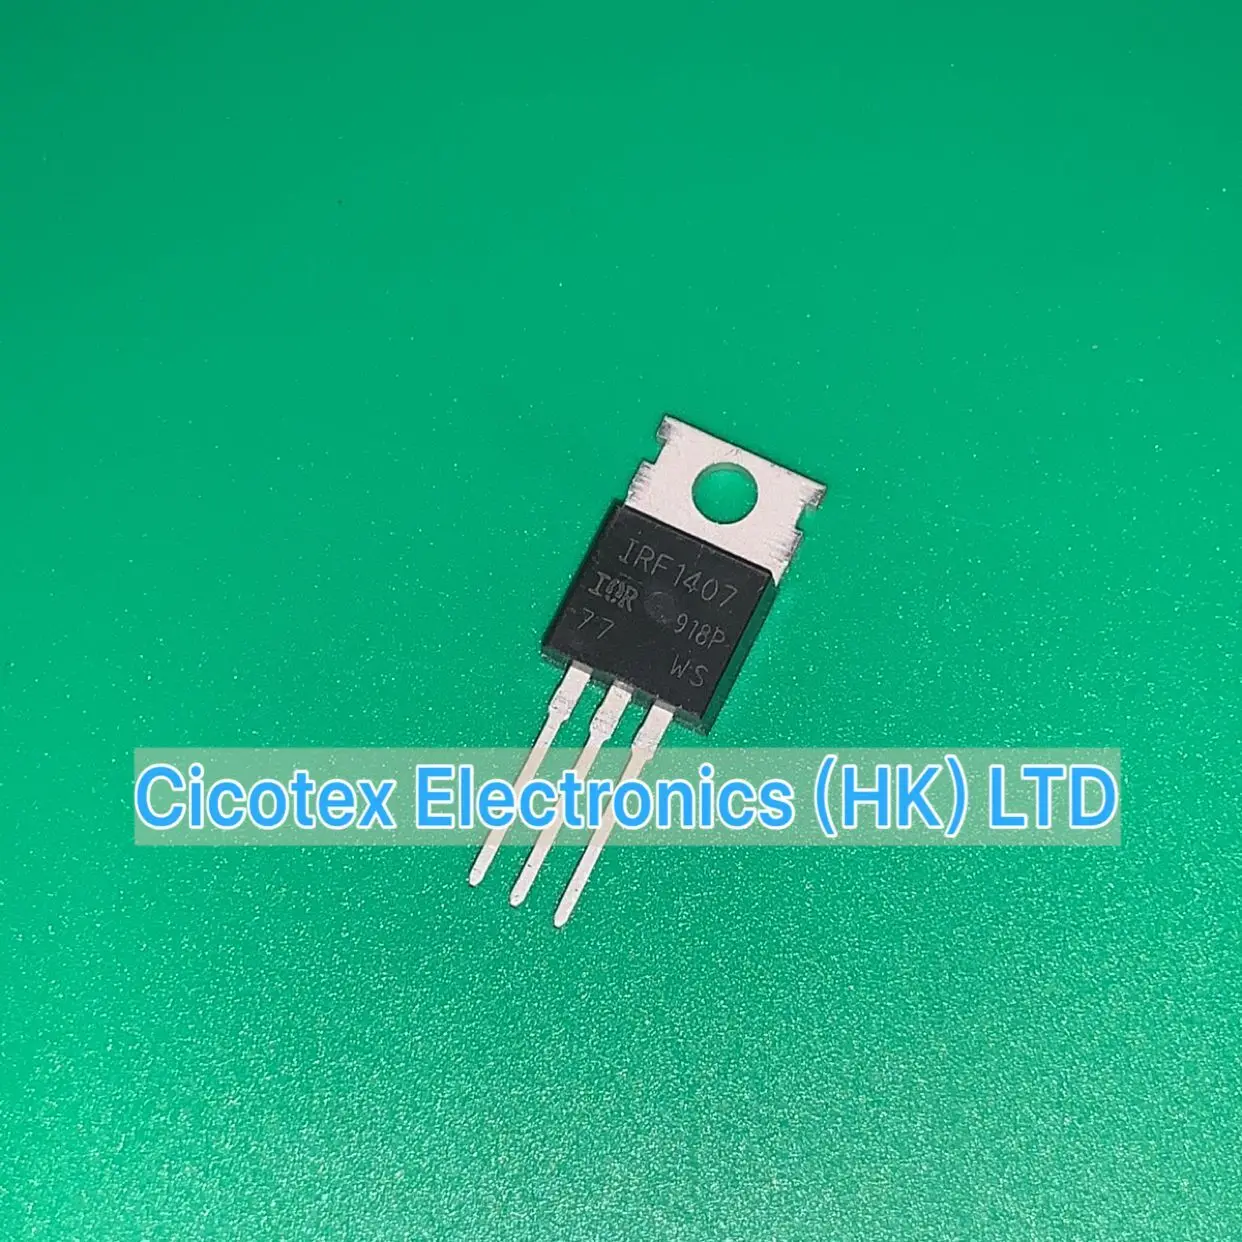 

10pcs/lot IRF1407 PBF TO220AB IRF1407PBF IRF 1407 MOSFET N-CH 75V 130A TO-220AB 1407PBF